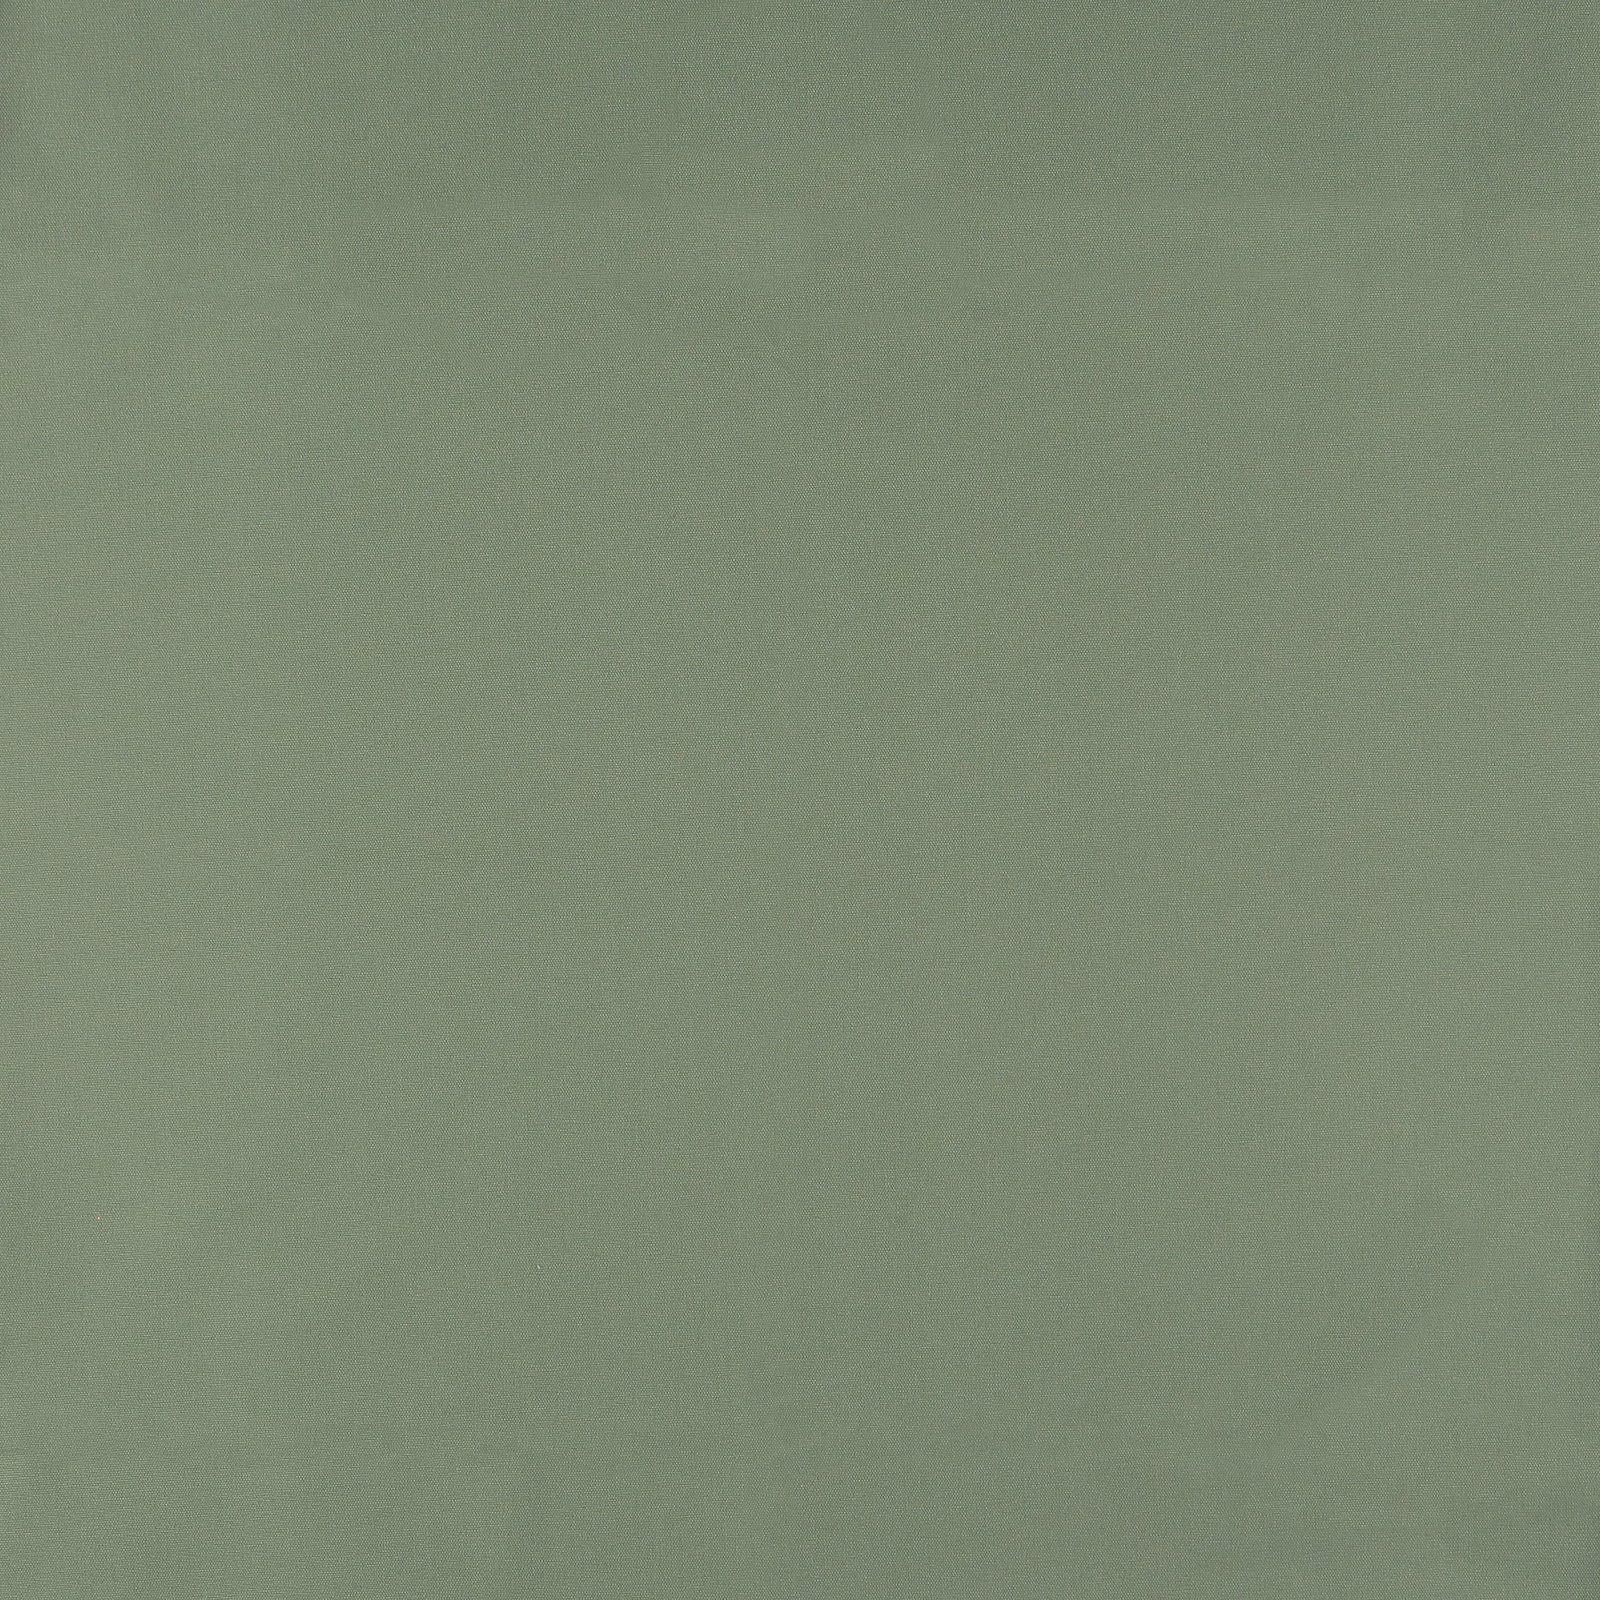 Cotton canvas light dusty green 780351_pack_solid